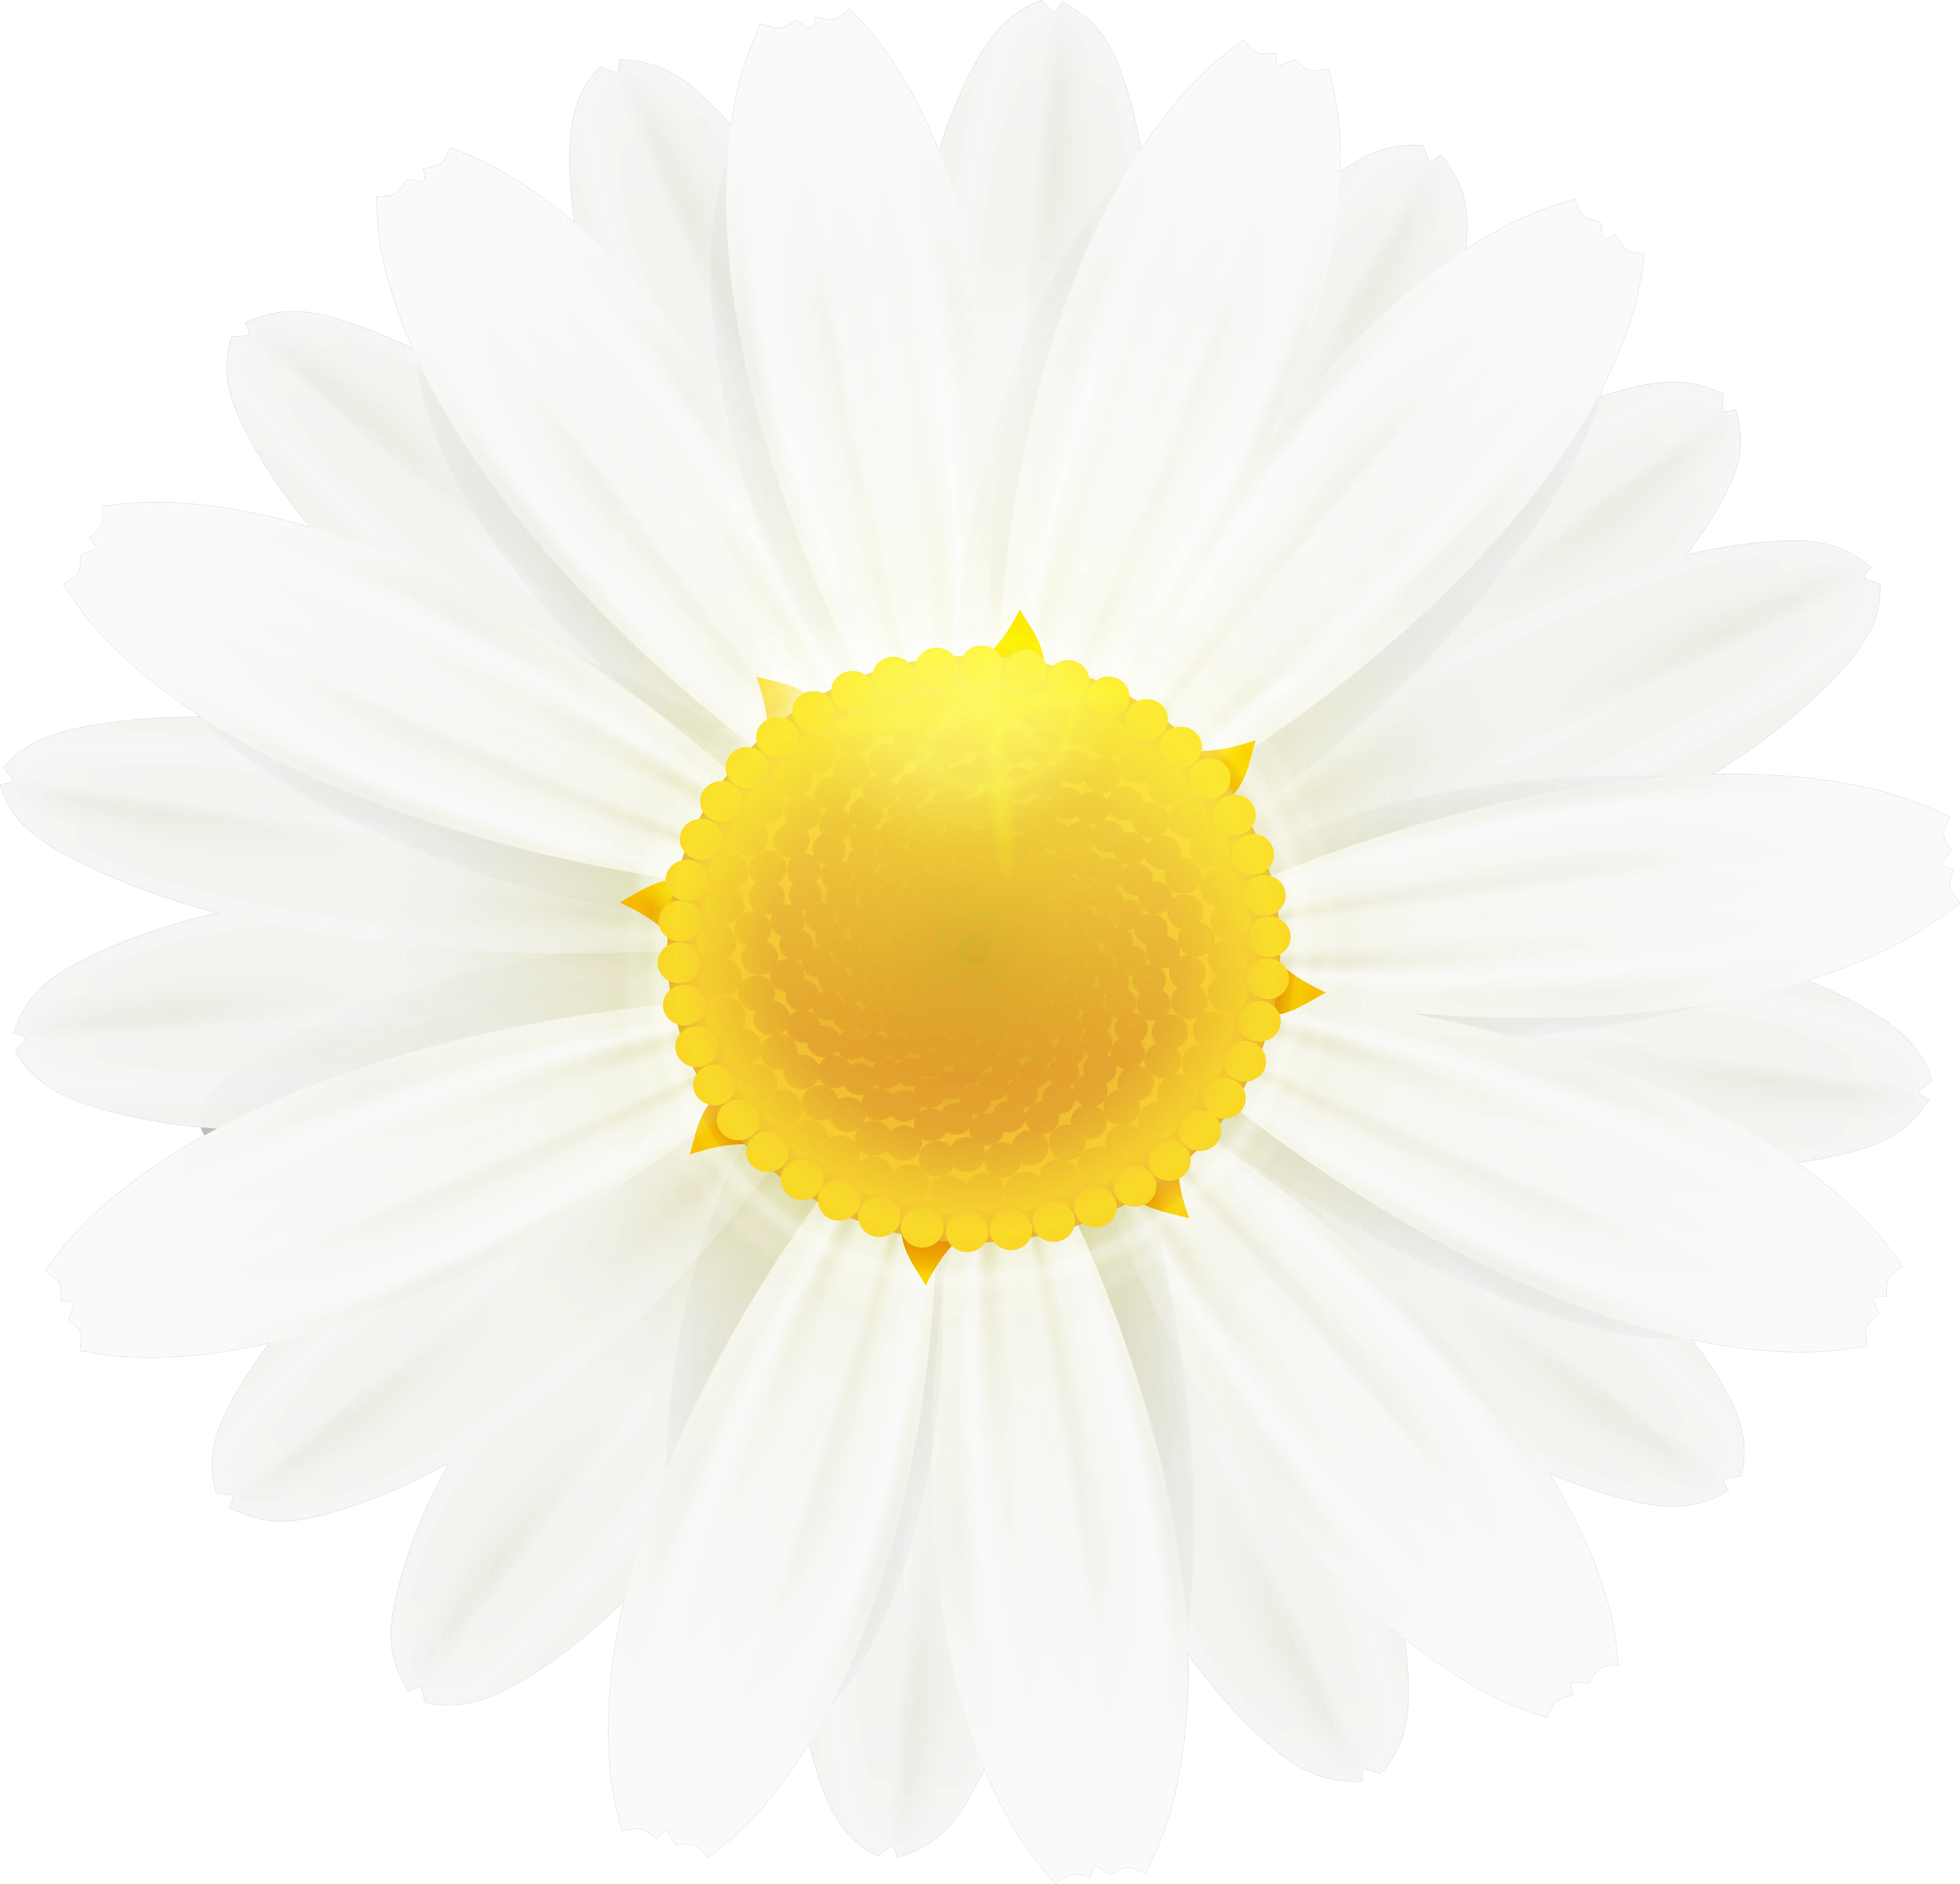 Download Free Png White Daisy Flower Clipart Image Gallery Flowers